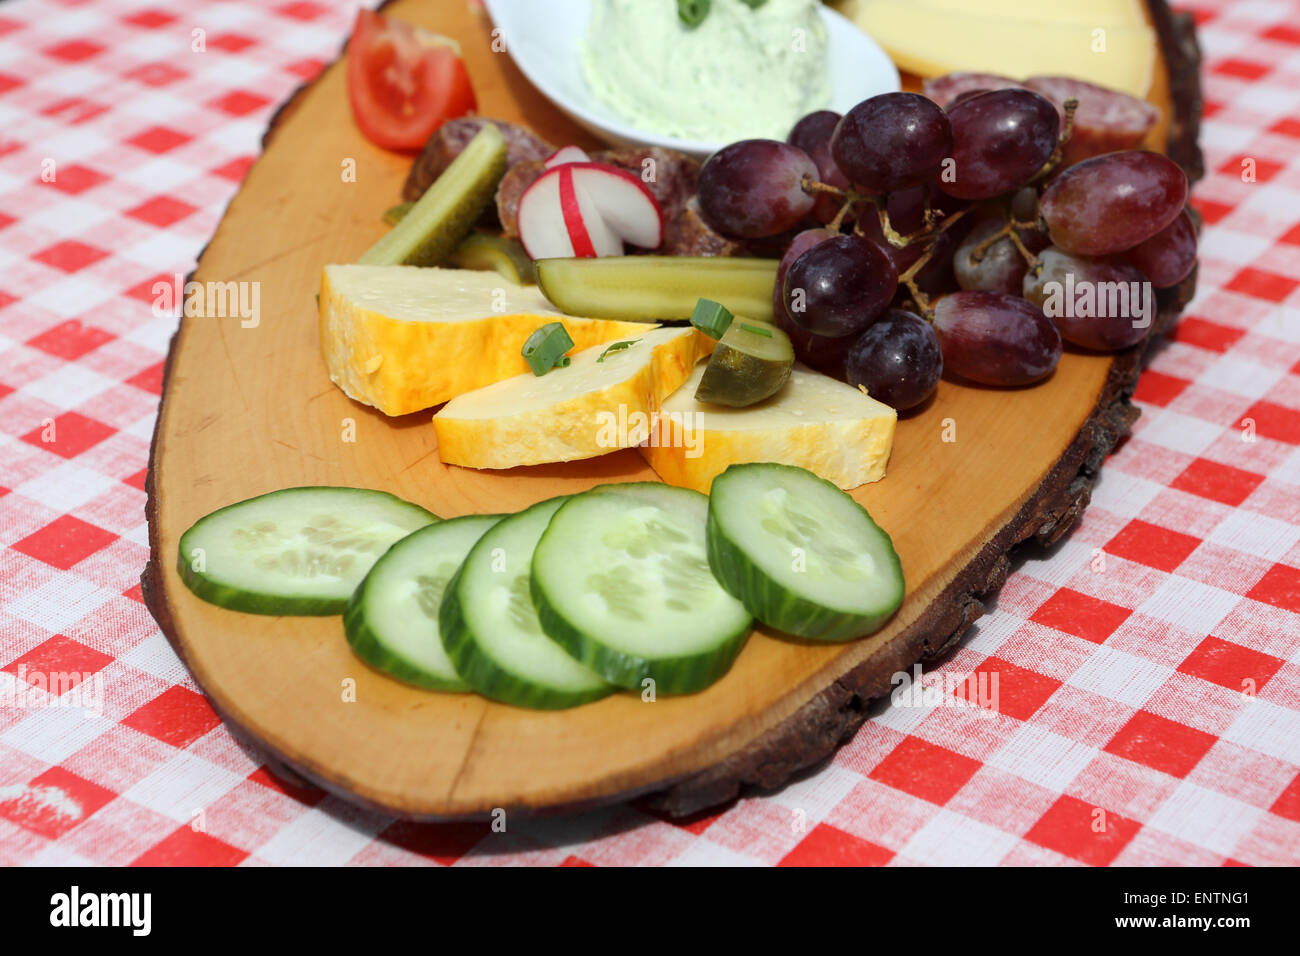 A traditional Thuringian 'Brotzeit' meal served in Germany. Stock Photo